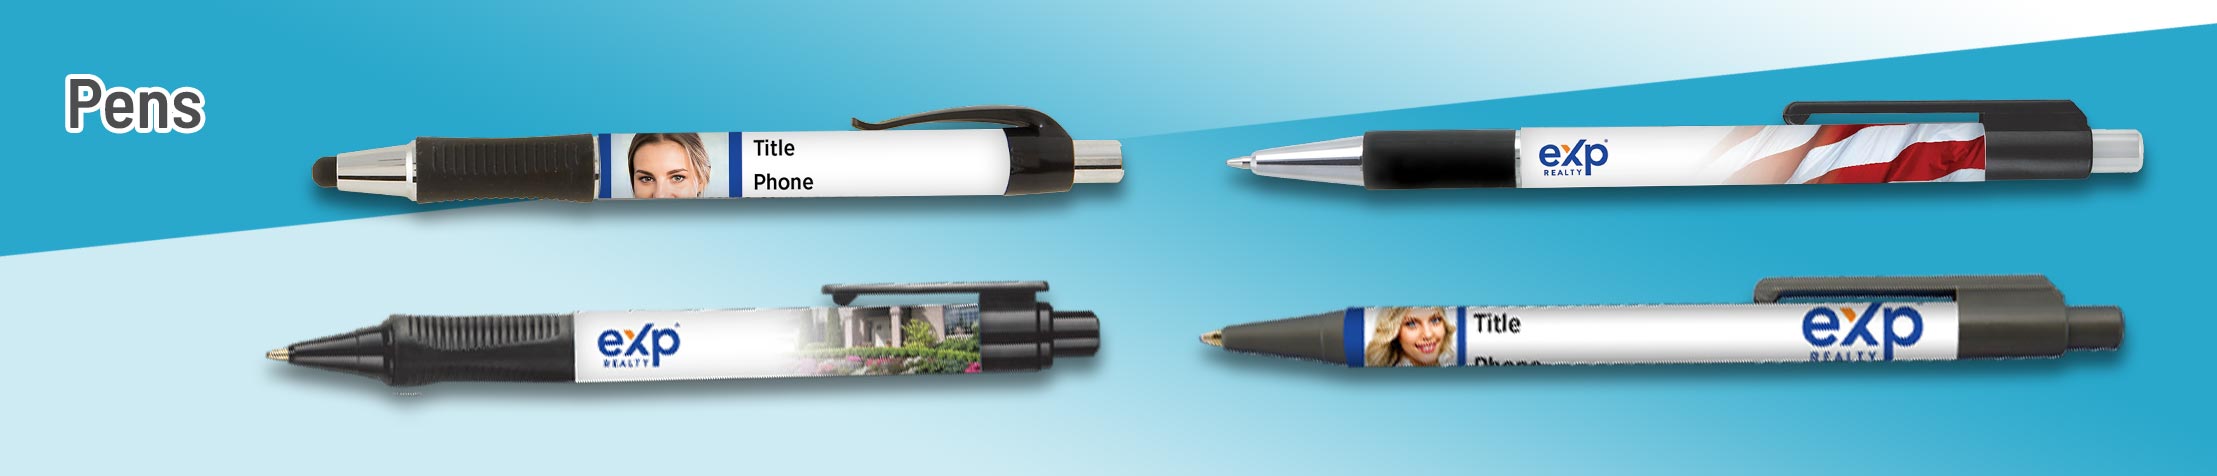 eXp Realty Real Estate Personalized Pens -  promotional products: Grip Write Pens, Colorama Pens, Vision Touch Pens, and Colorama Grip Pens | Sparkprint.com